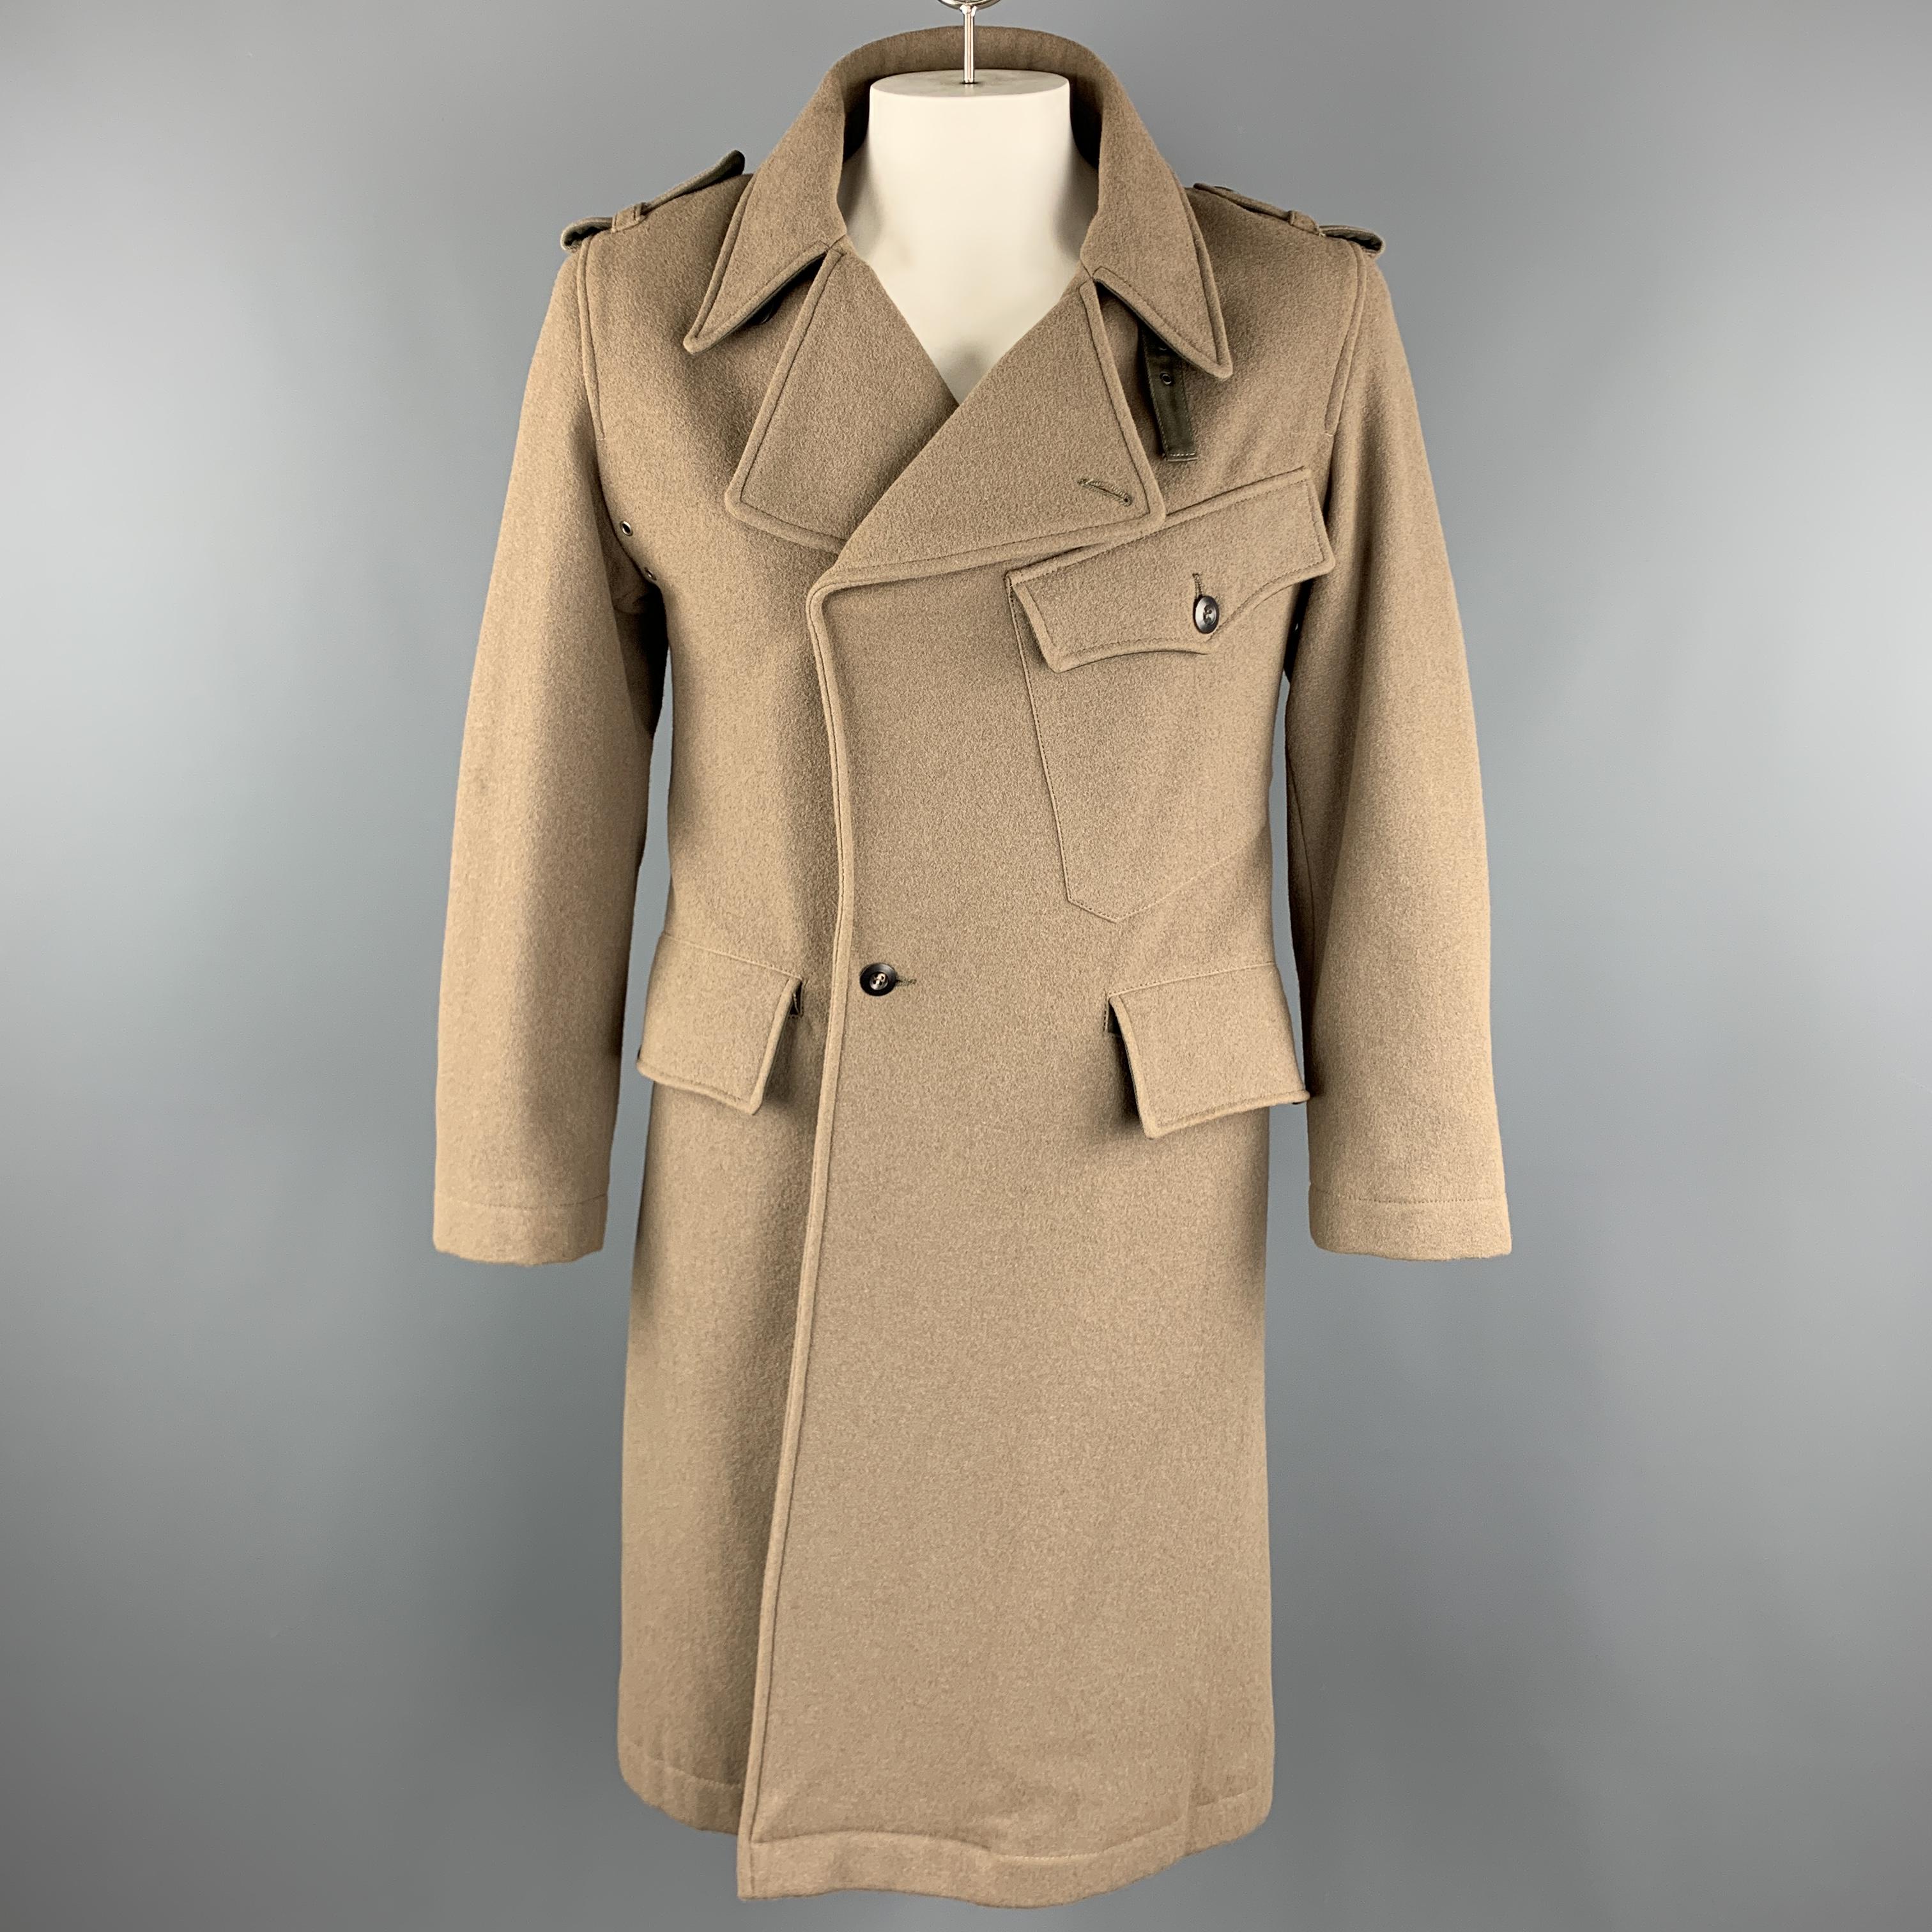 ANDREW MACKENZIE Long Coat comes in a taupe solid wool blend material, with a peak lapel, epaulettes, double breasted, patch and flap pockets, and antique gold tone metal buttons at cuffs. Made in Italy. 

Excellent Pre-Owned Condition.
Marked: No